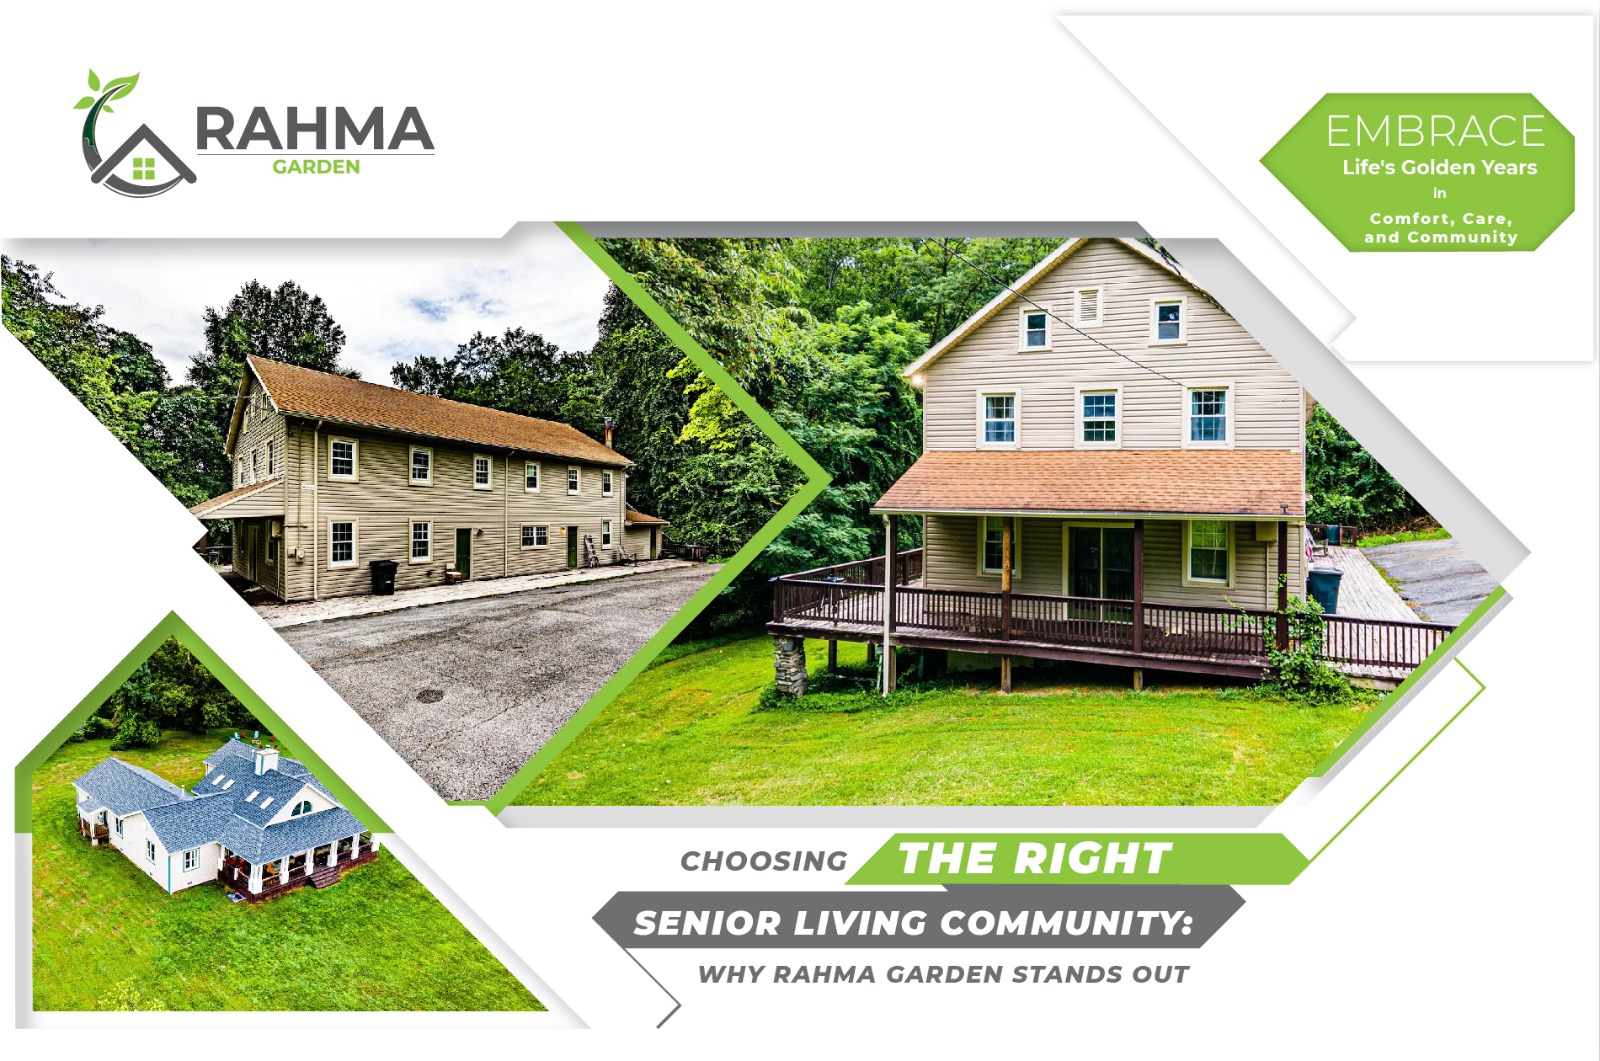 Choosing the Right Senior Living Community: Why Rahma Garden Stands Out